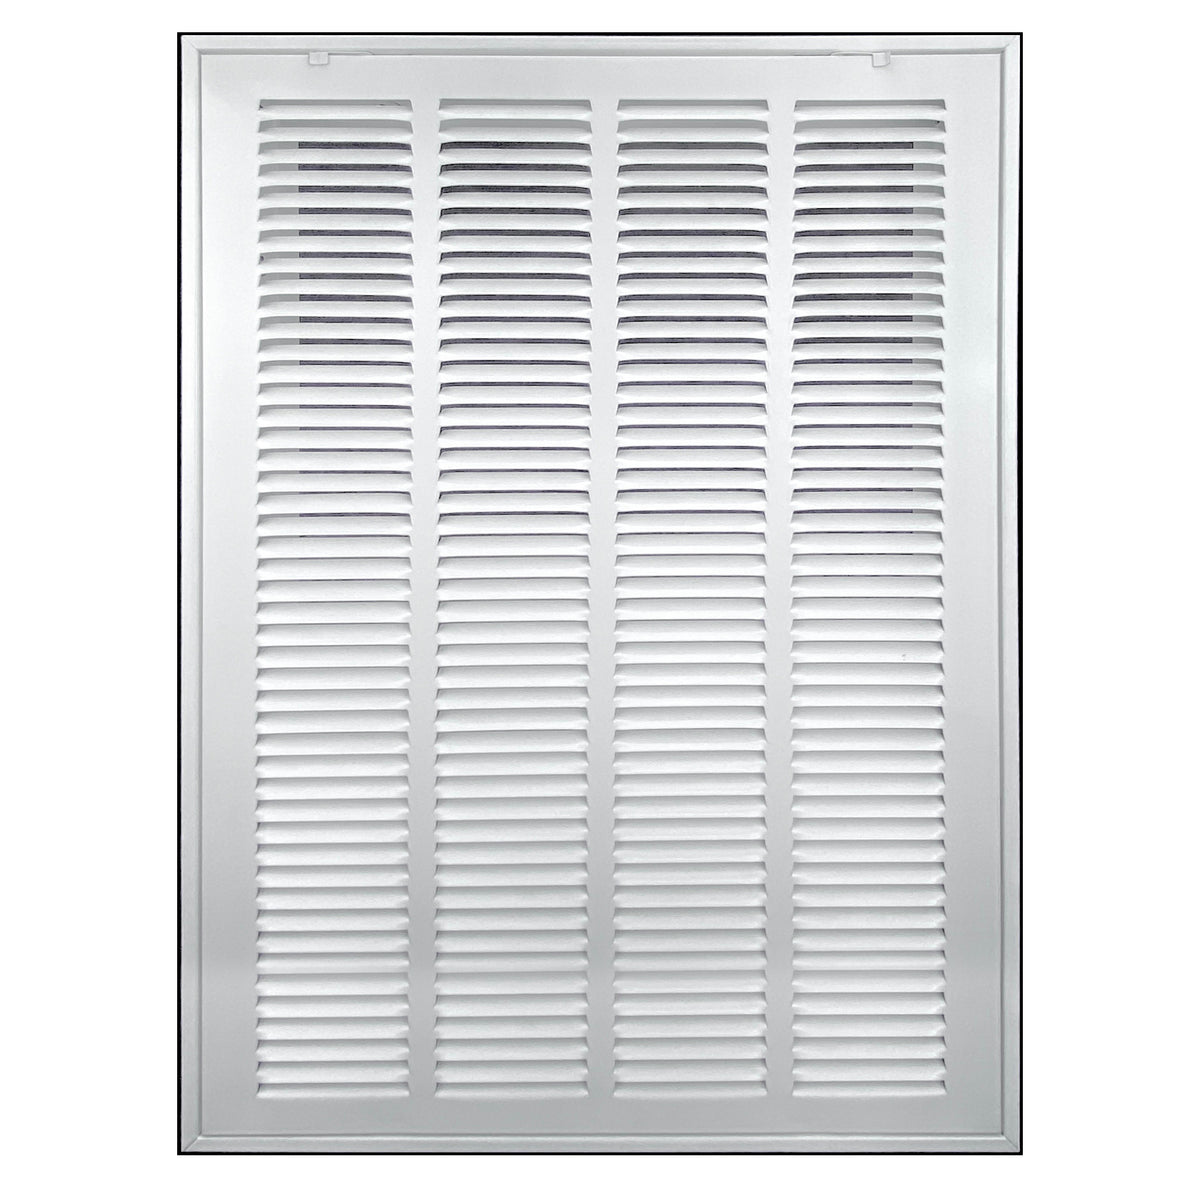 airgrilles 16" x 25" duct opening   steel return air filter grille for sidewall and ceiling hnd-rafg1-wh-16x25 752505979625 - 1